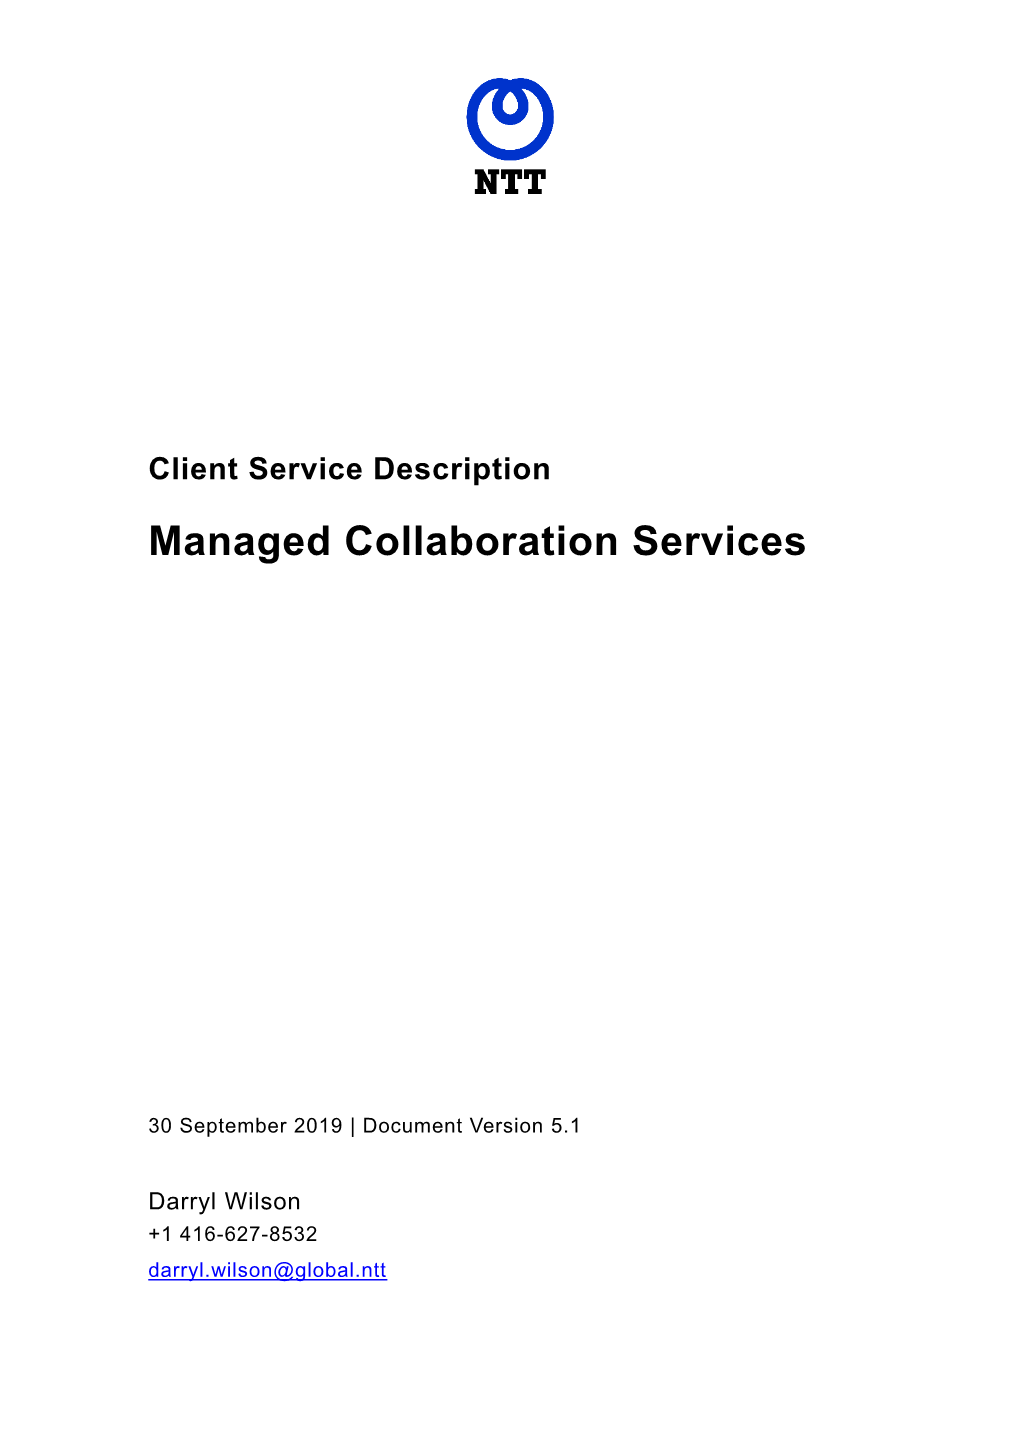 Managed Collaboration Services